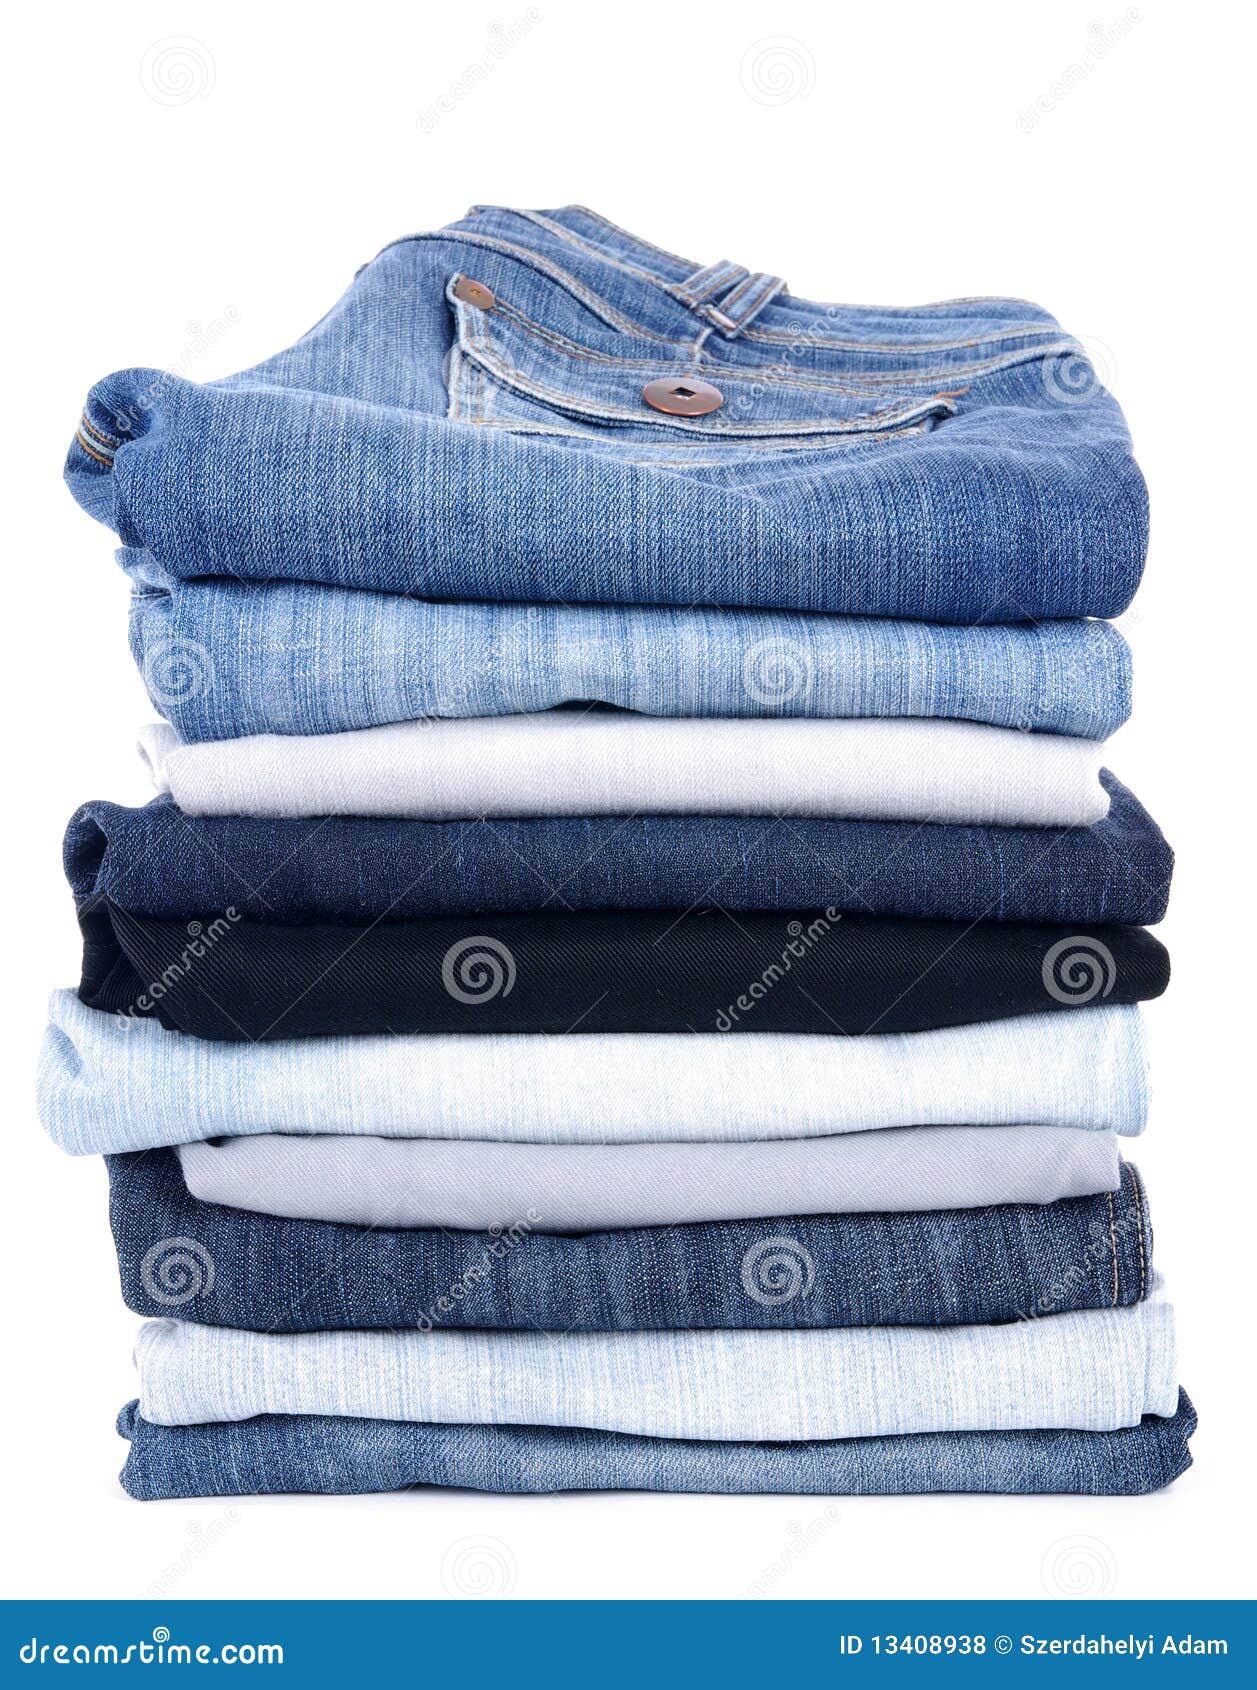 Jeans stack stock photo. Image of blue, close, macro - 13408938